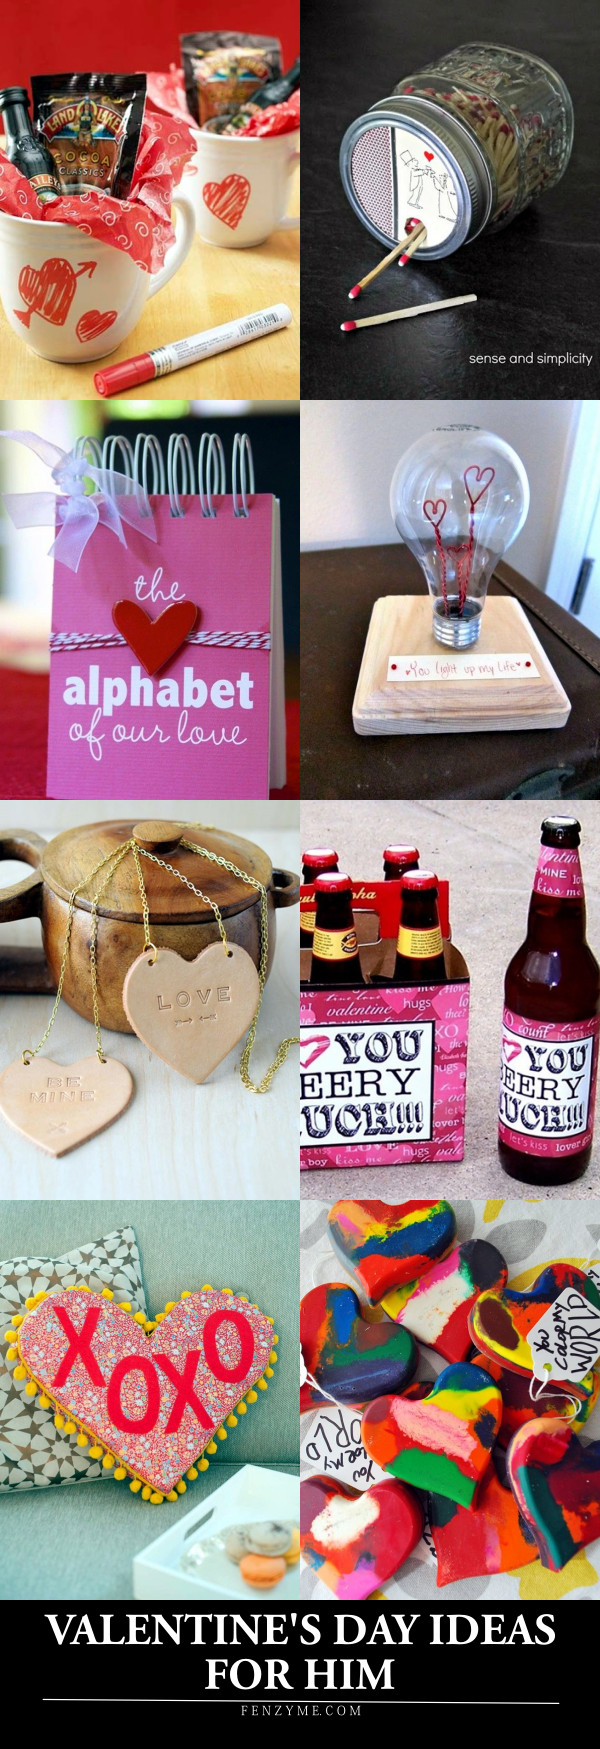 Cute Ideas For Valentines Day For Him
 101 Homemade Valentines Day Ideas for Him that re really CUTE